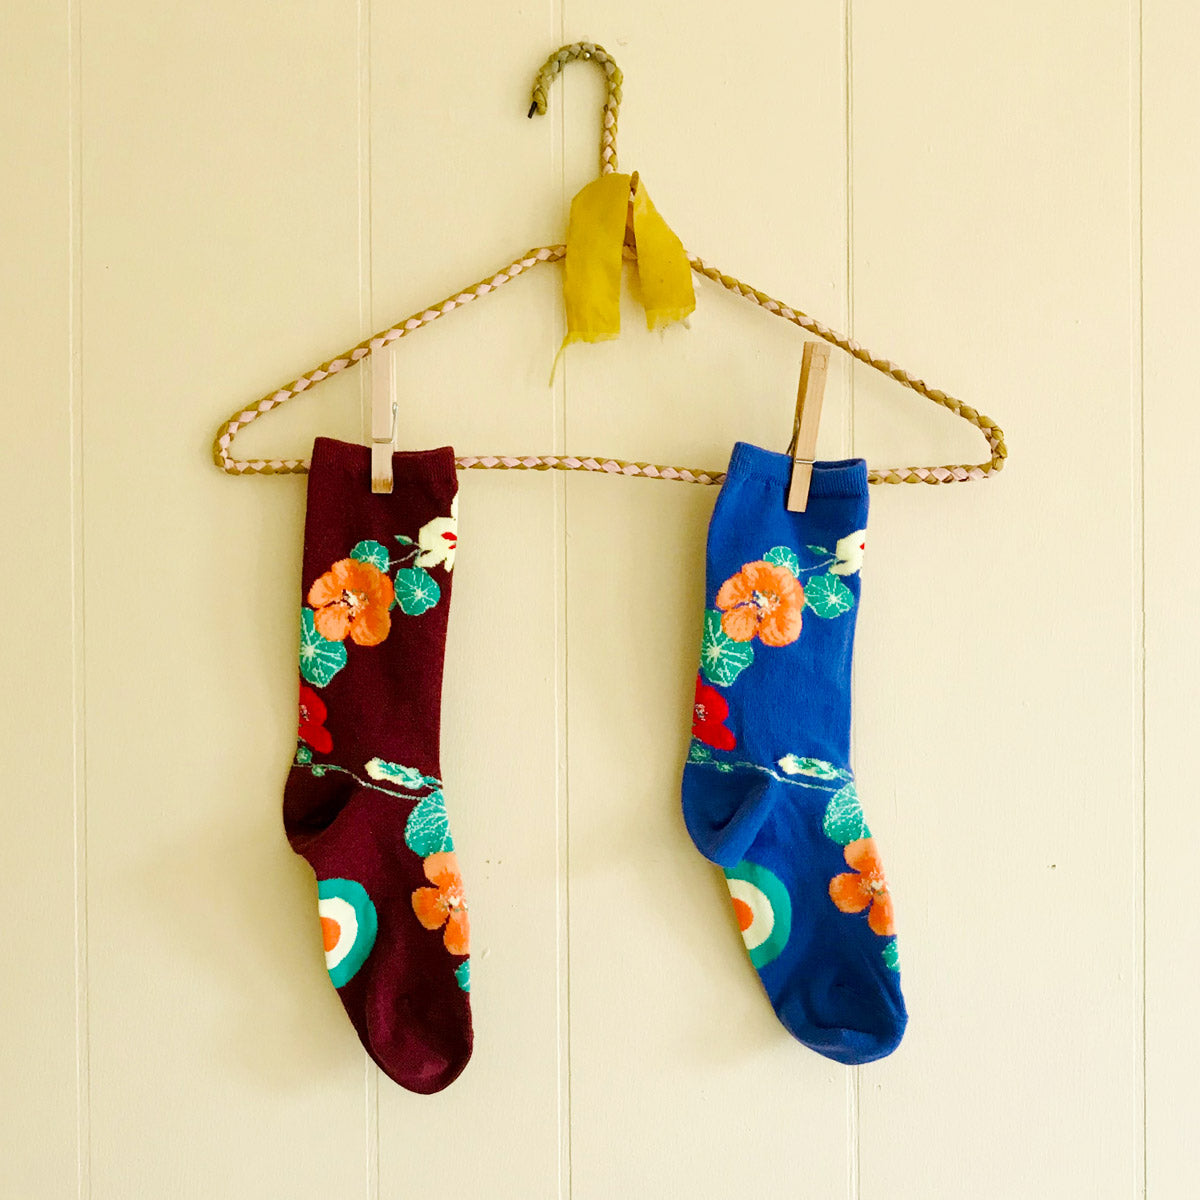 Cute floral socks with nasturtiums hang on a decorative hanger